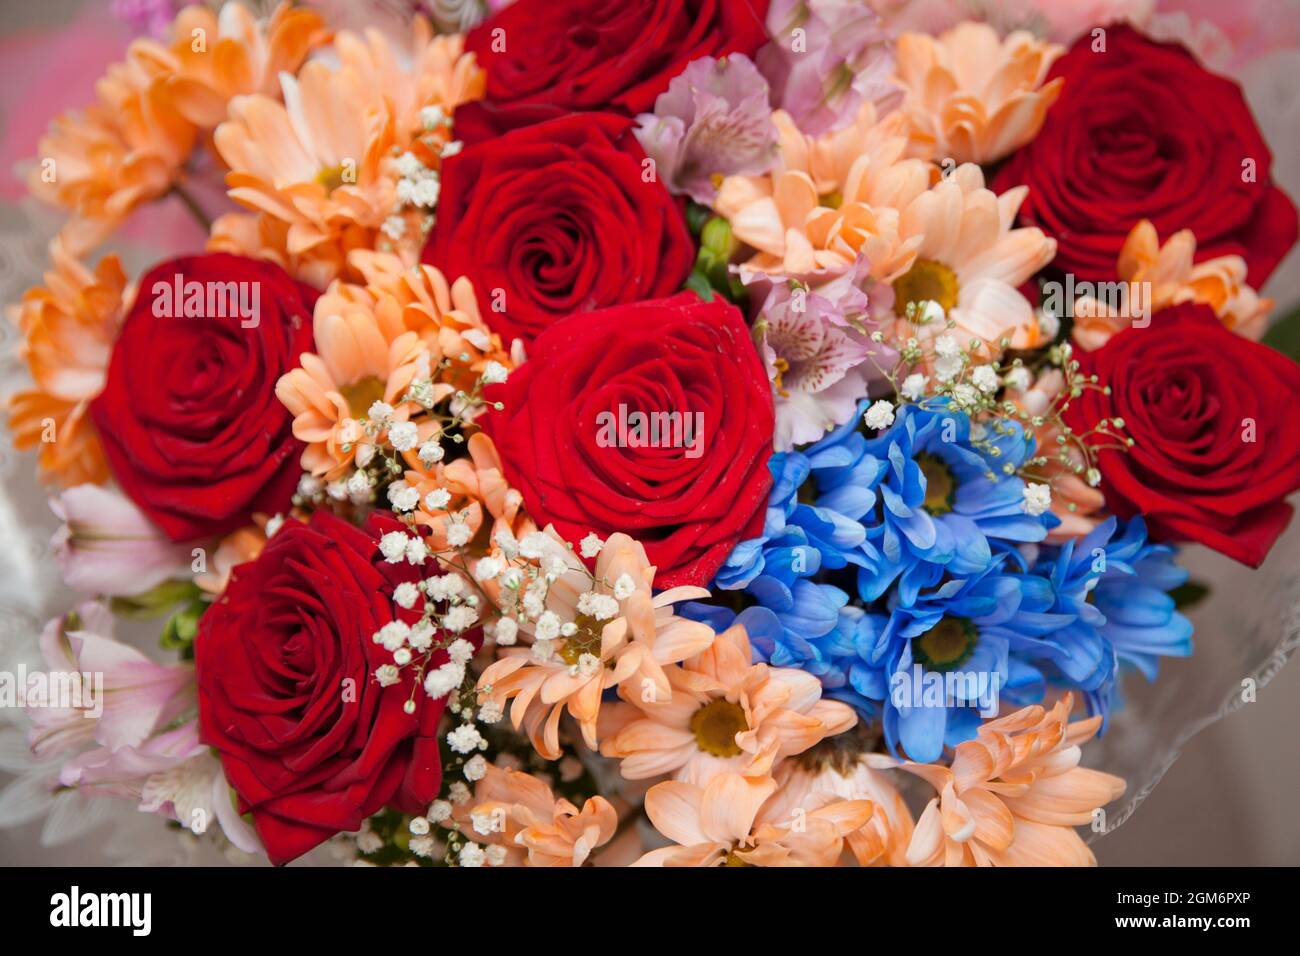 Beautiful bouquet of flowers. Roses and chrysanthemums. Bright flowers. Stock Photo